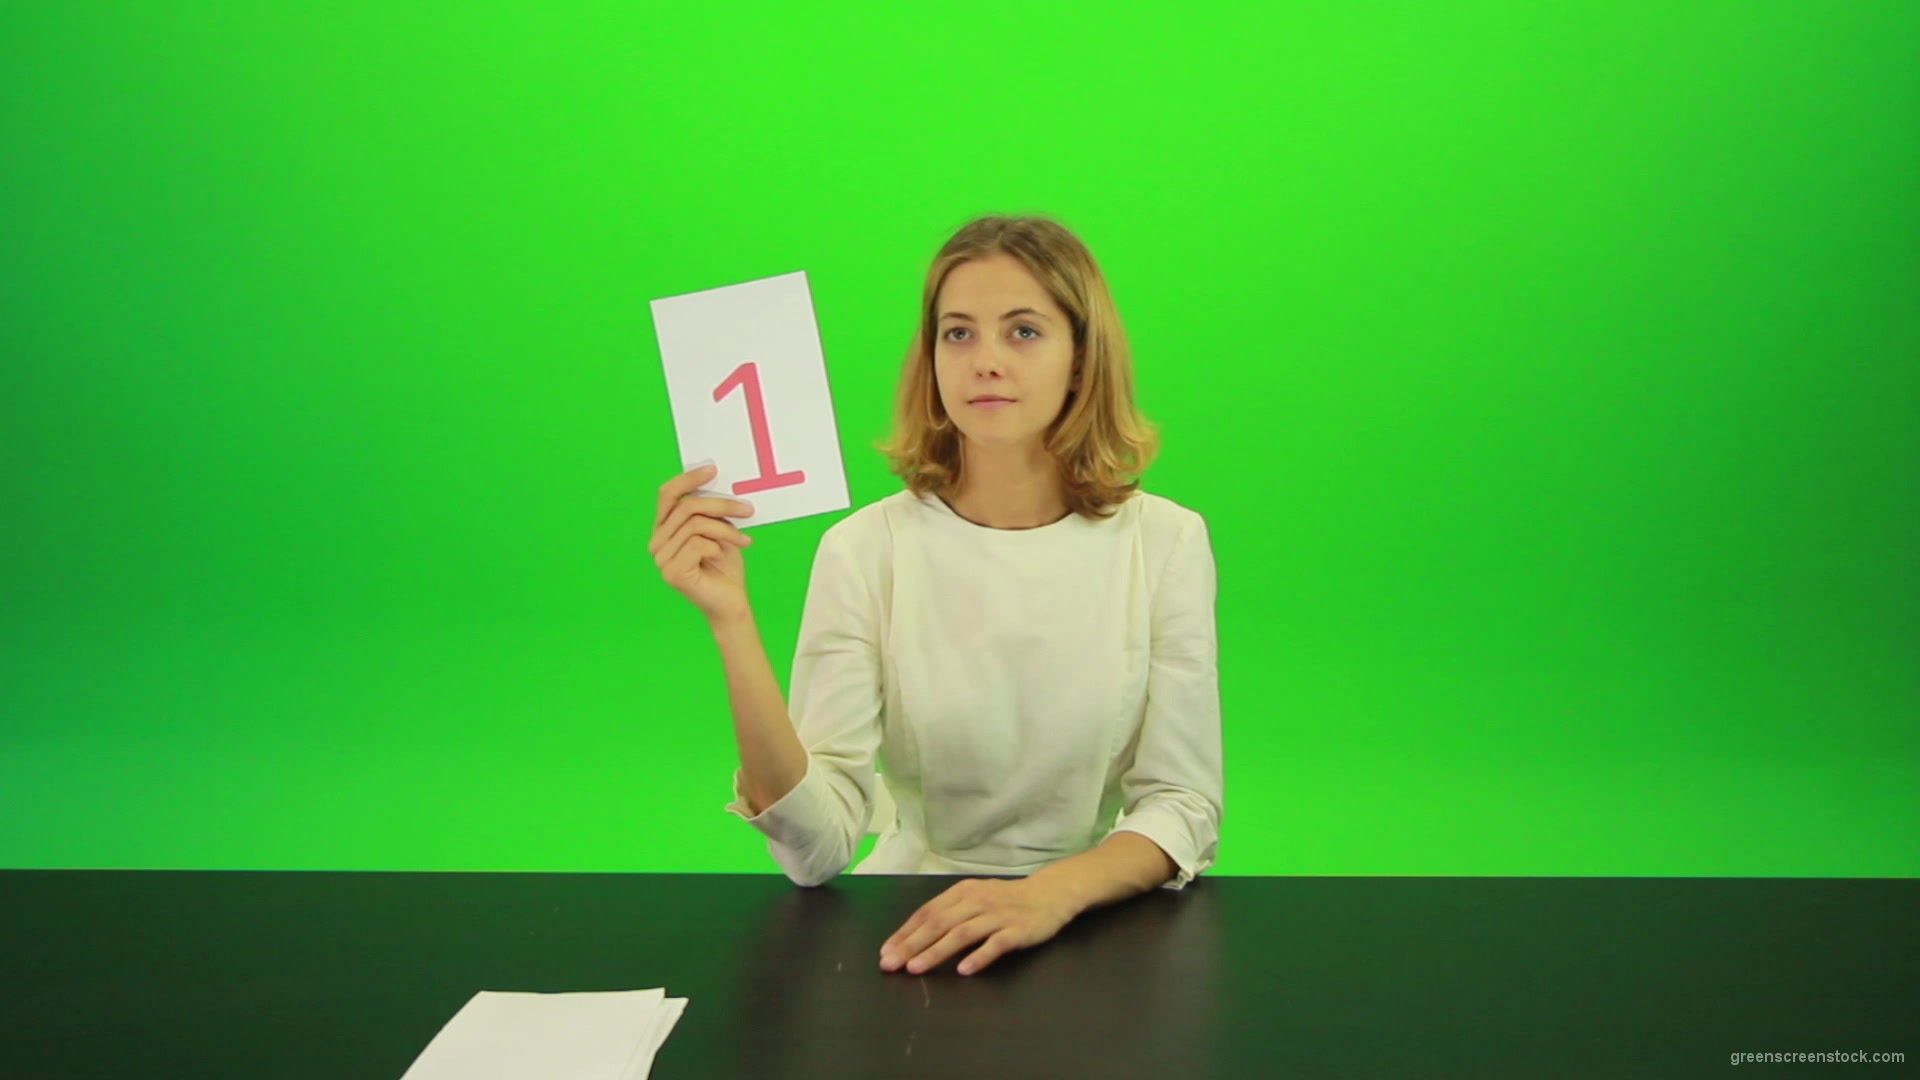 Blonde-girl-adult-gives-1-one-point-mark-score-Full-HD-Green-Screen-Video-Footage_006 Green Screen Stock